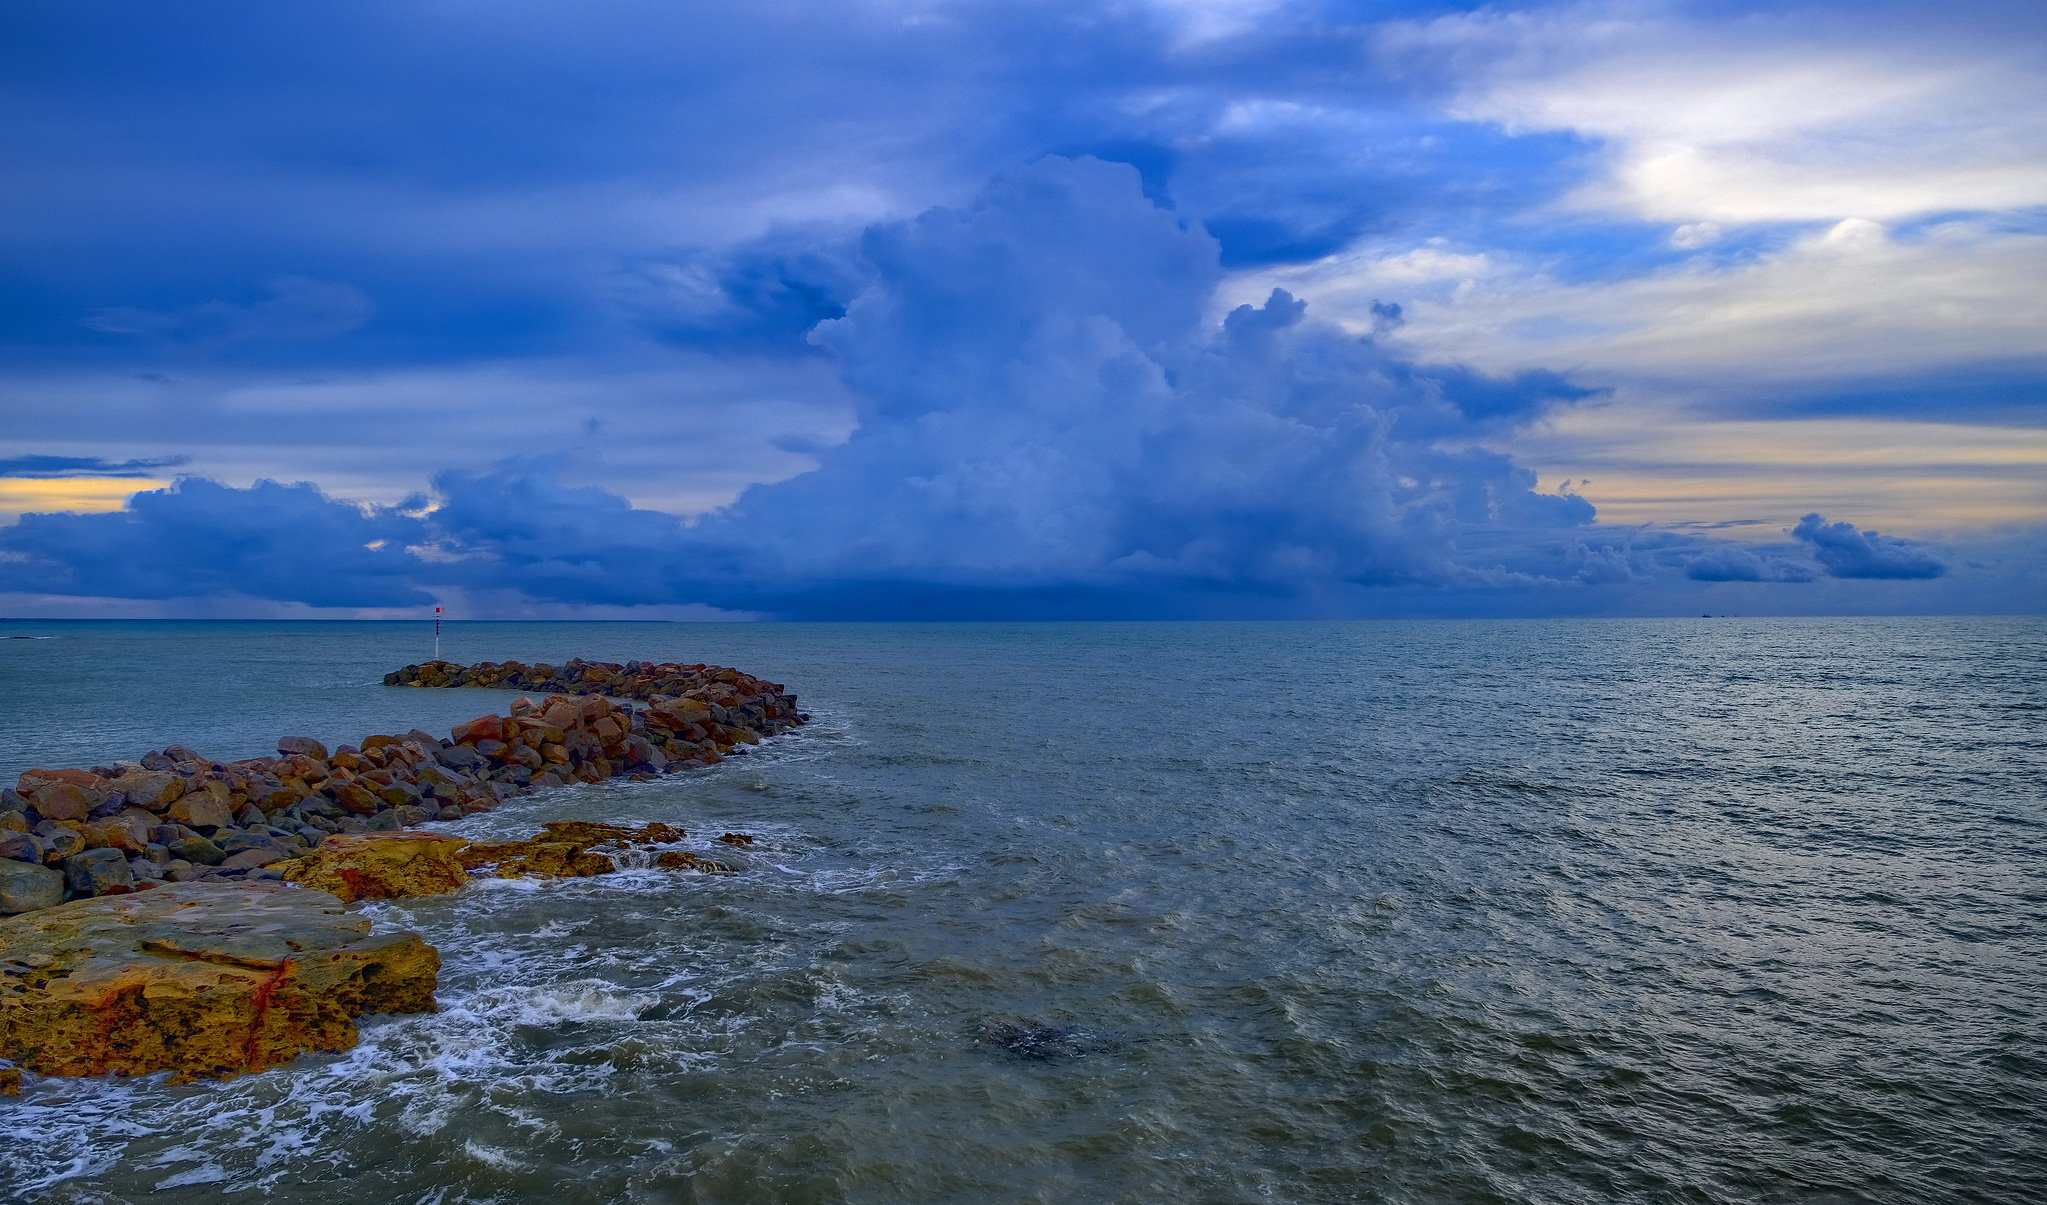 A monsoon off the coast of Darwin Harbour